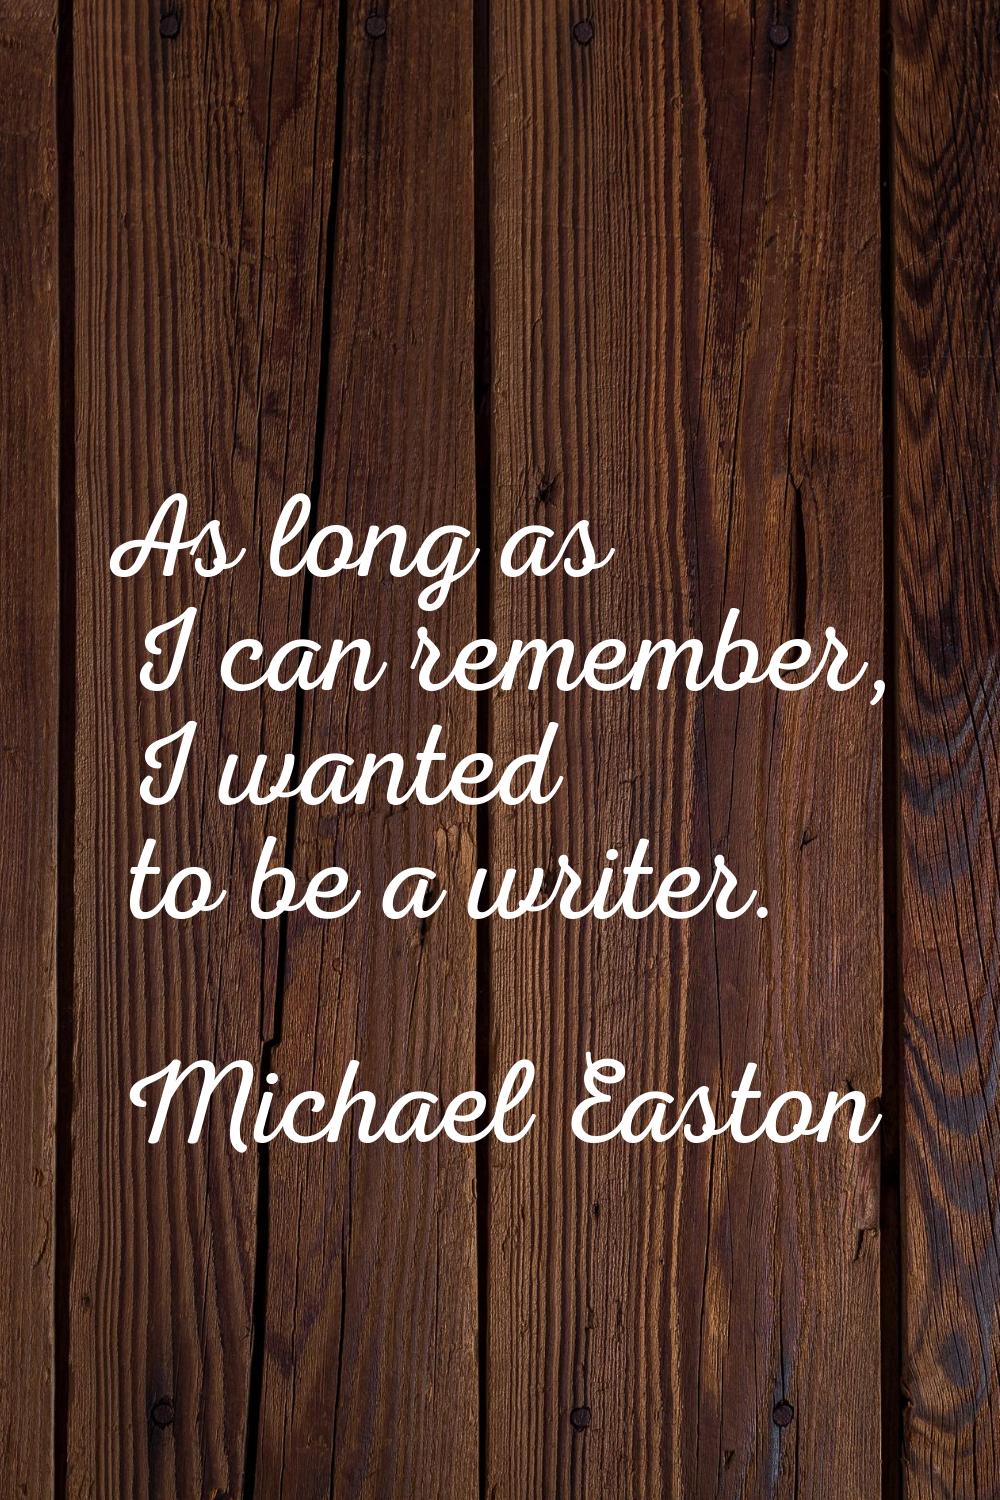 As long as I can remember, I wanted to be a writer.